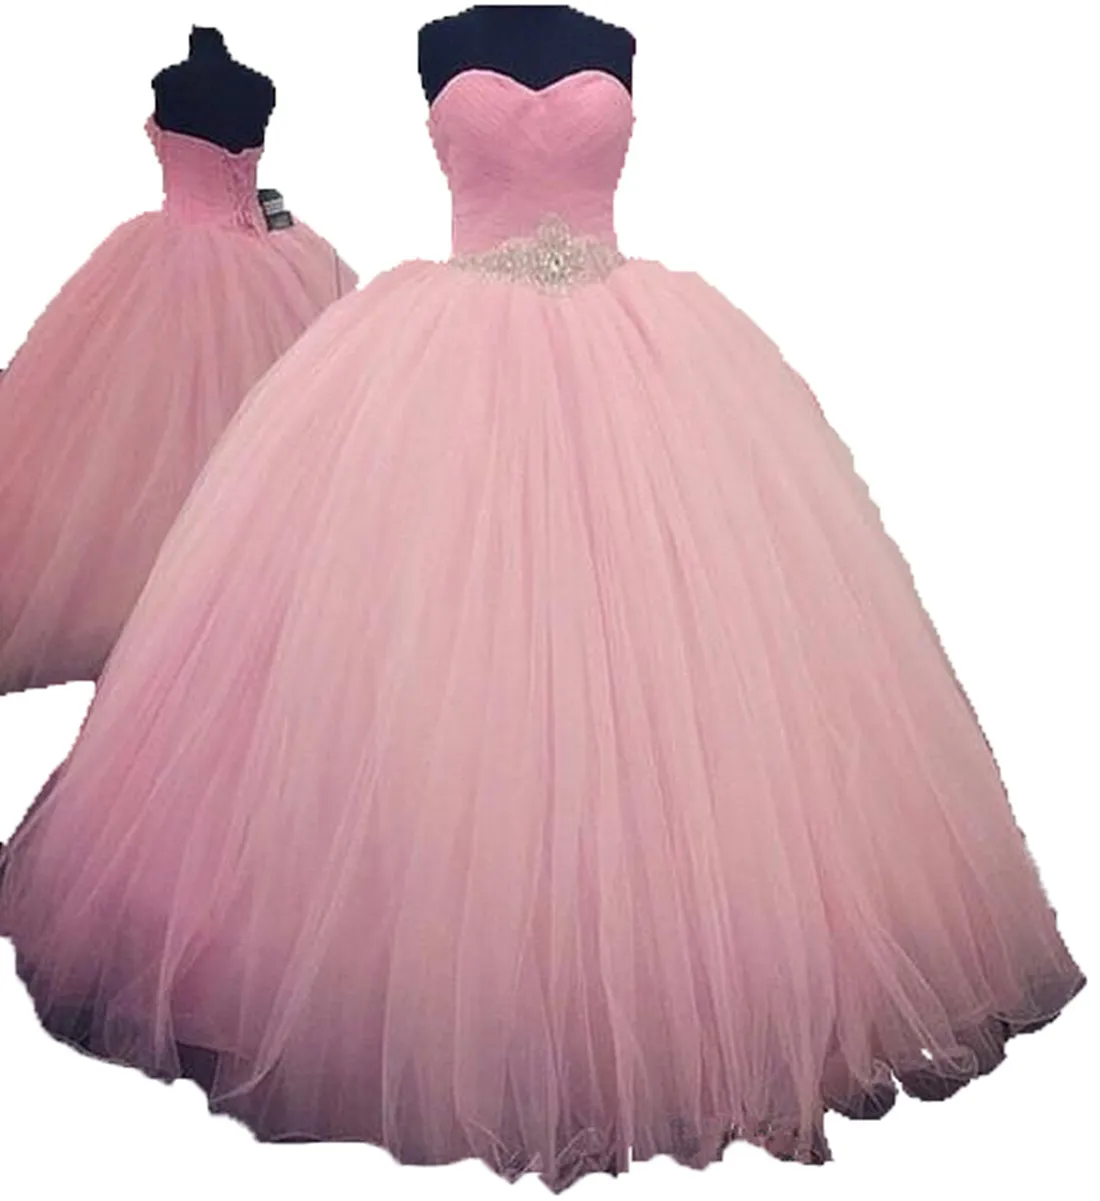 2018 Sexy Pink Ball Gown Quinceanera Dresses with Beaded Sweet 16 Dress Lace Up Floor Length vestido para debutante QC111